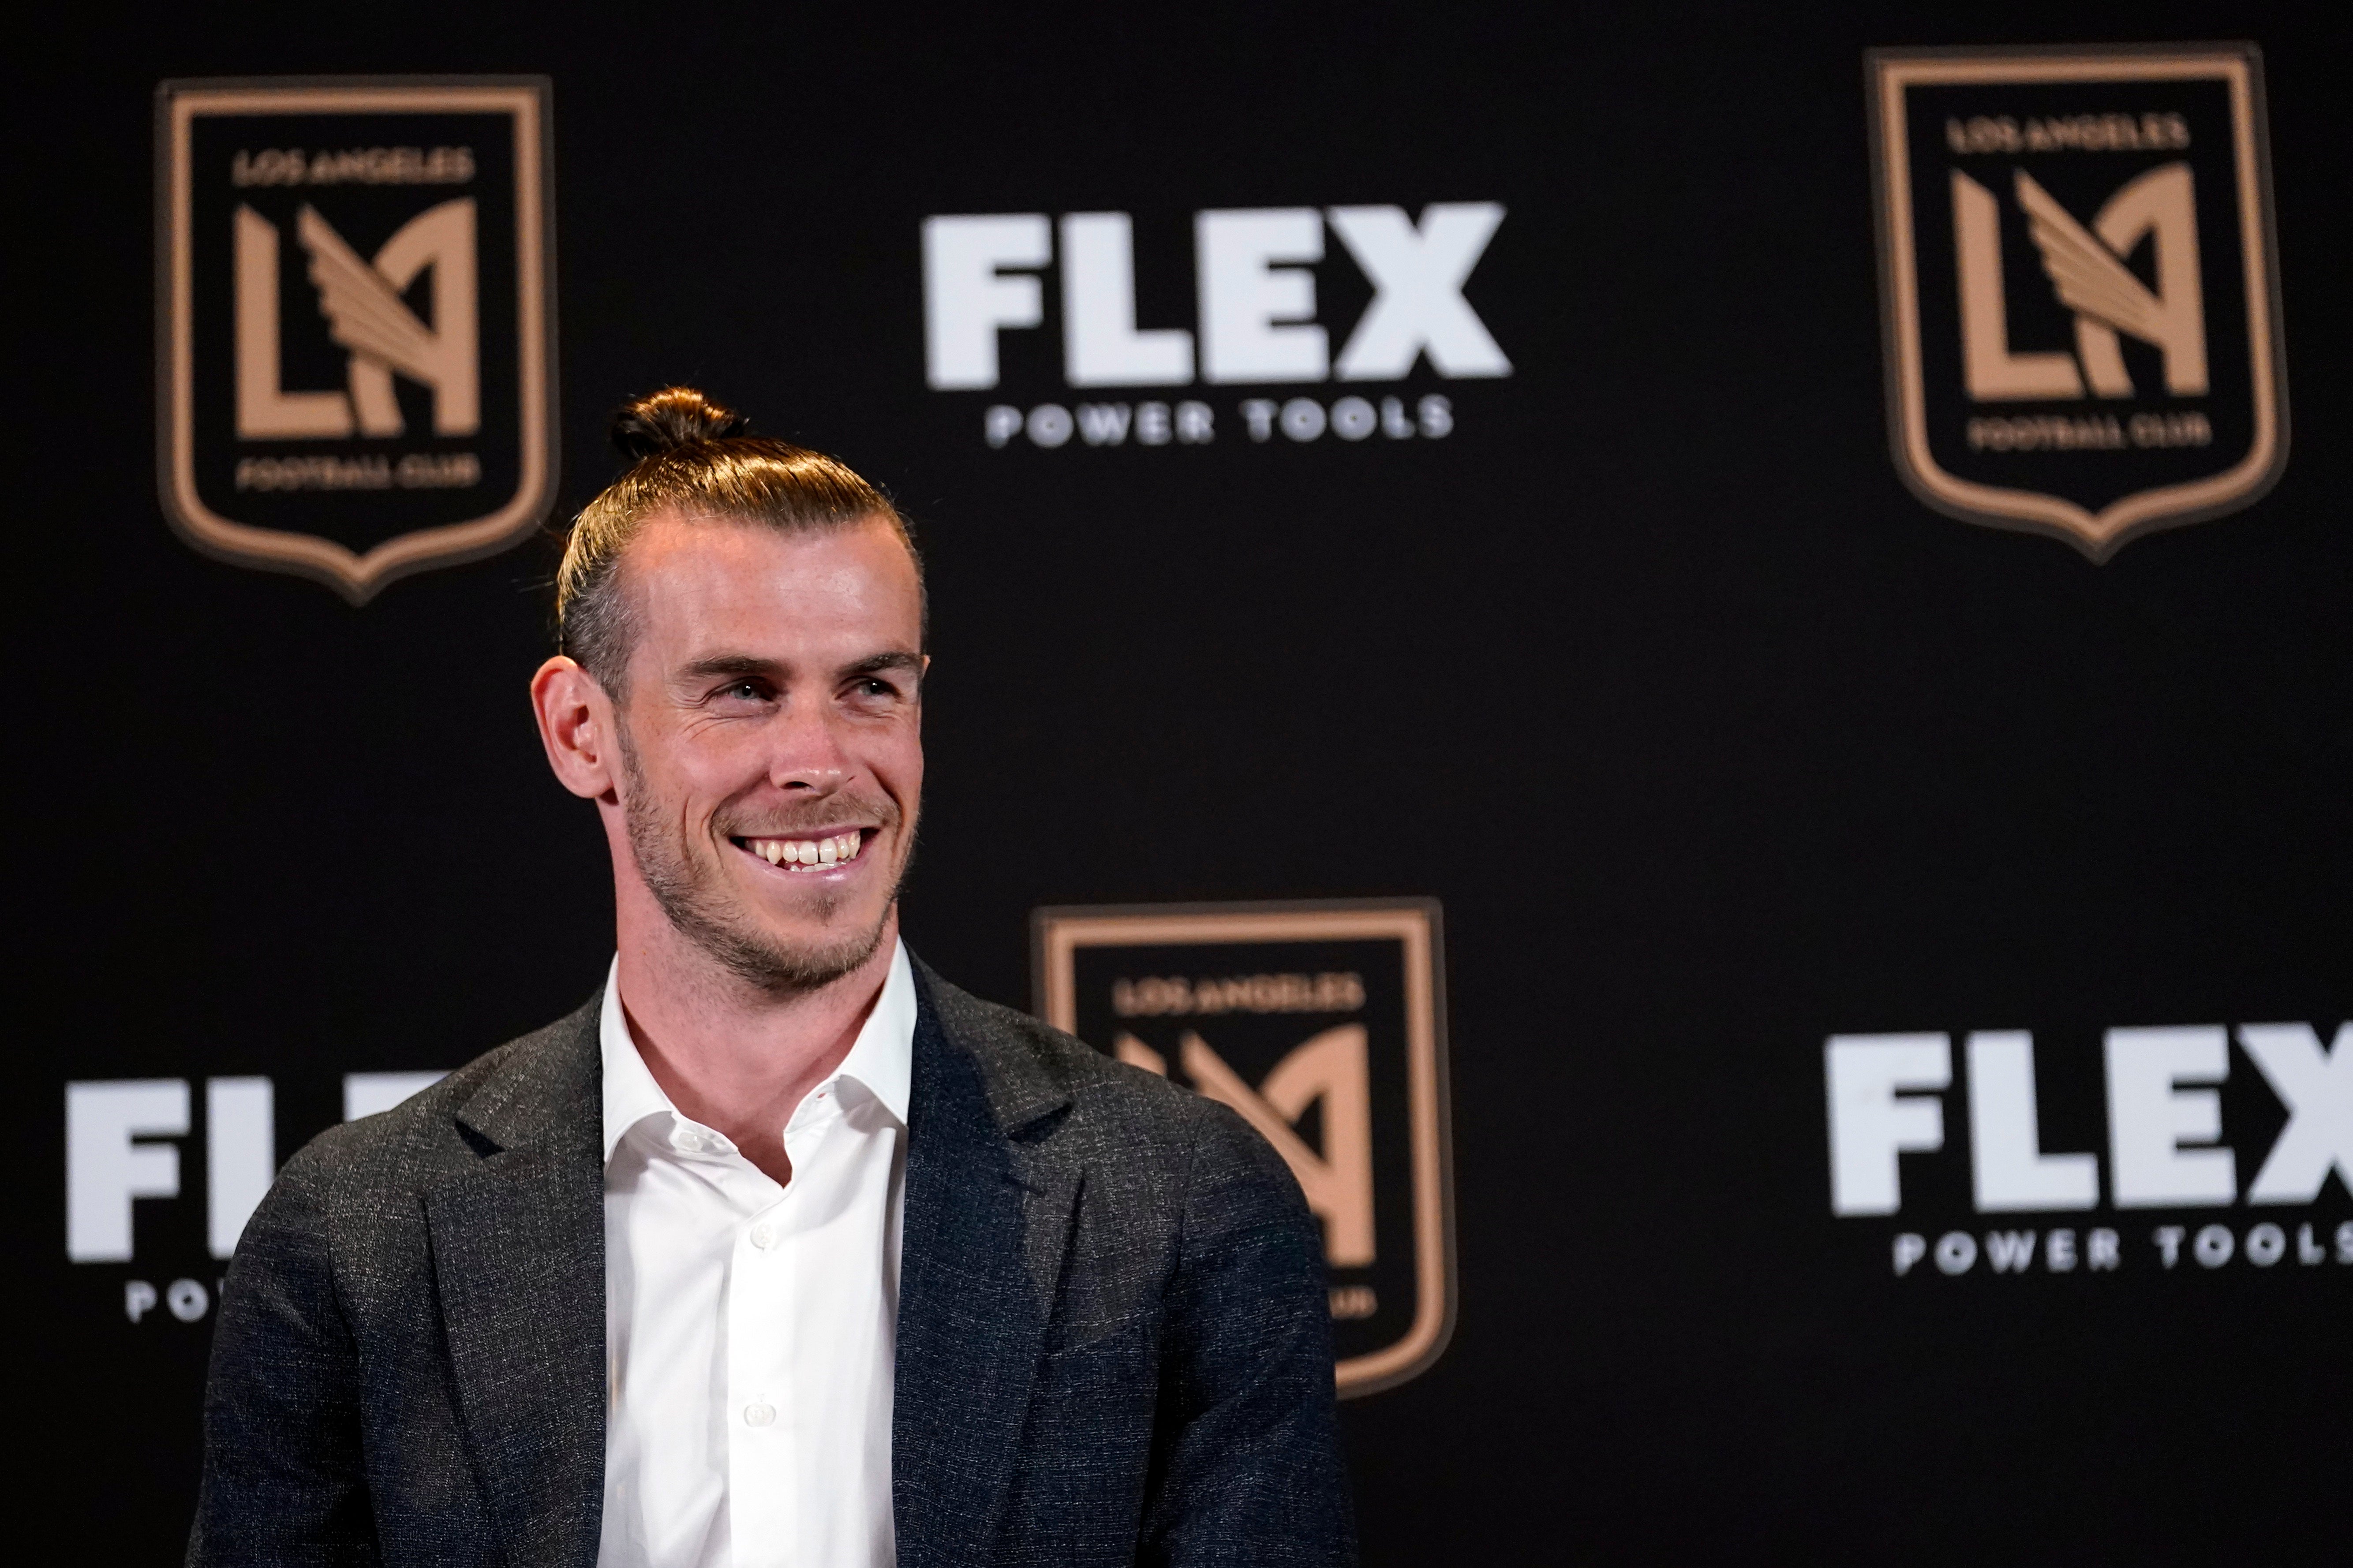 Gareth Bale scores first LAFC goal in victory over Sporting Kansas